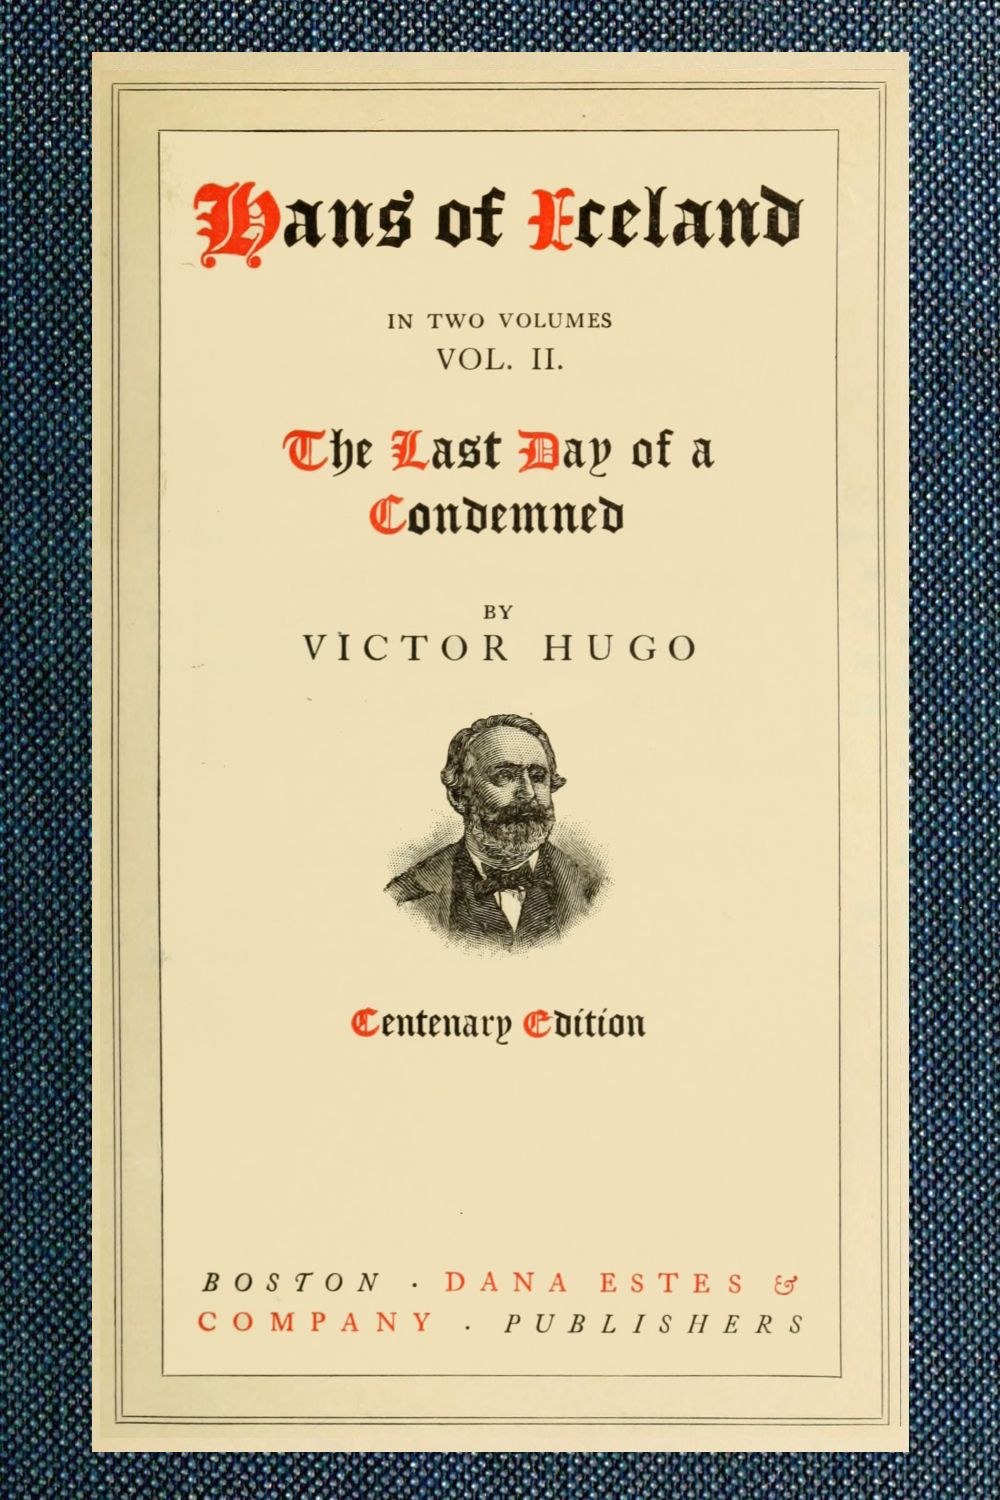 The Project Gutenberg eBook of Hans of Iceland; vol. 2 of 2, by Victor Hugo.